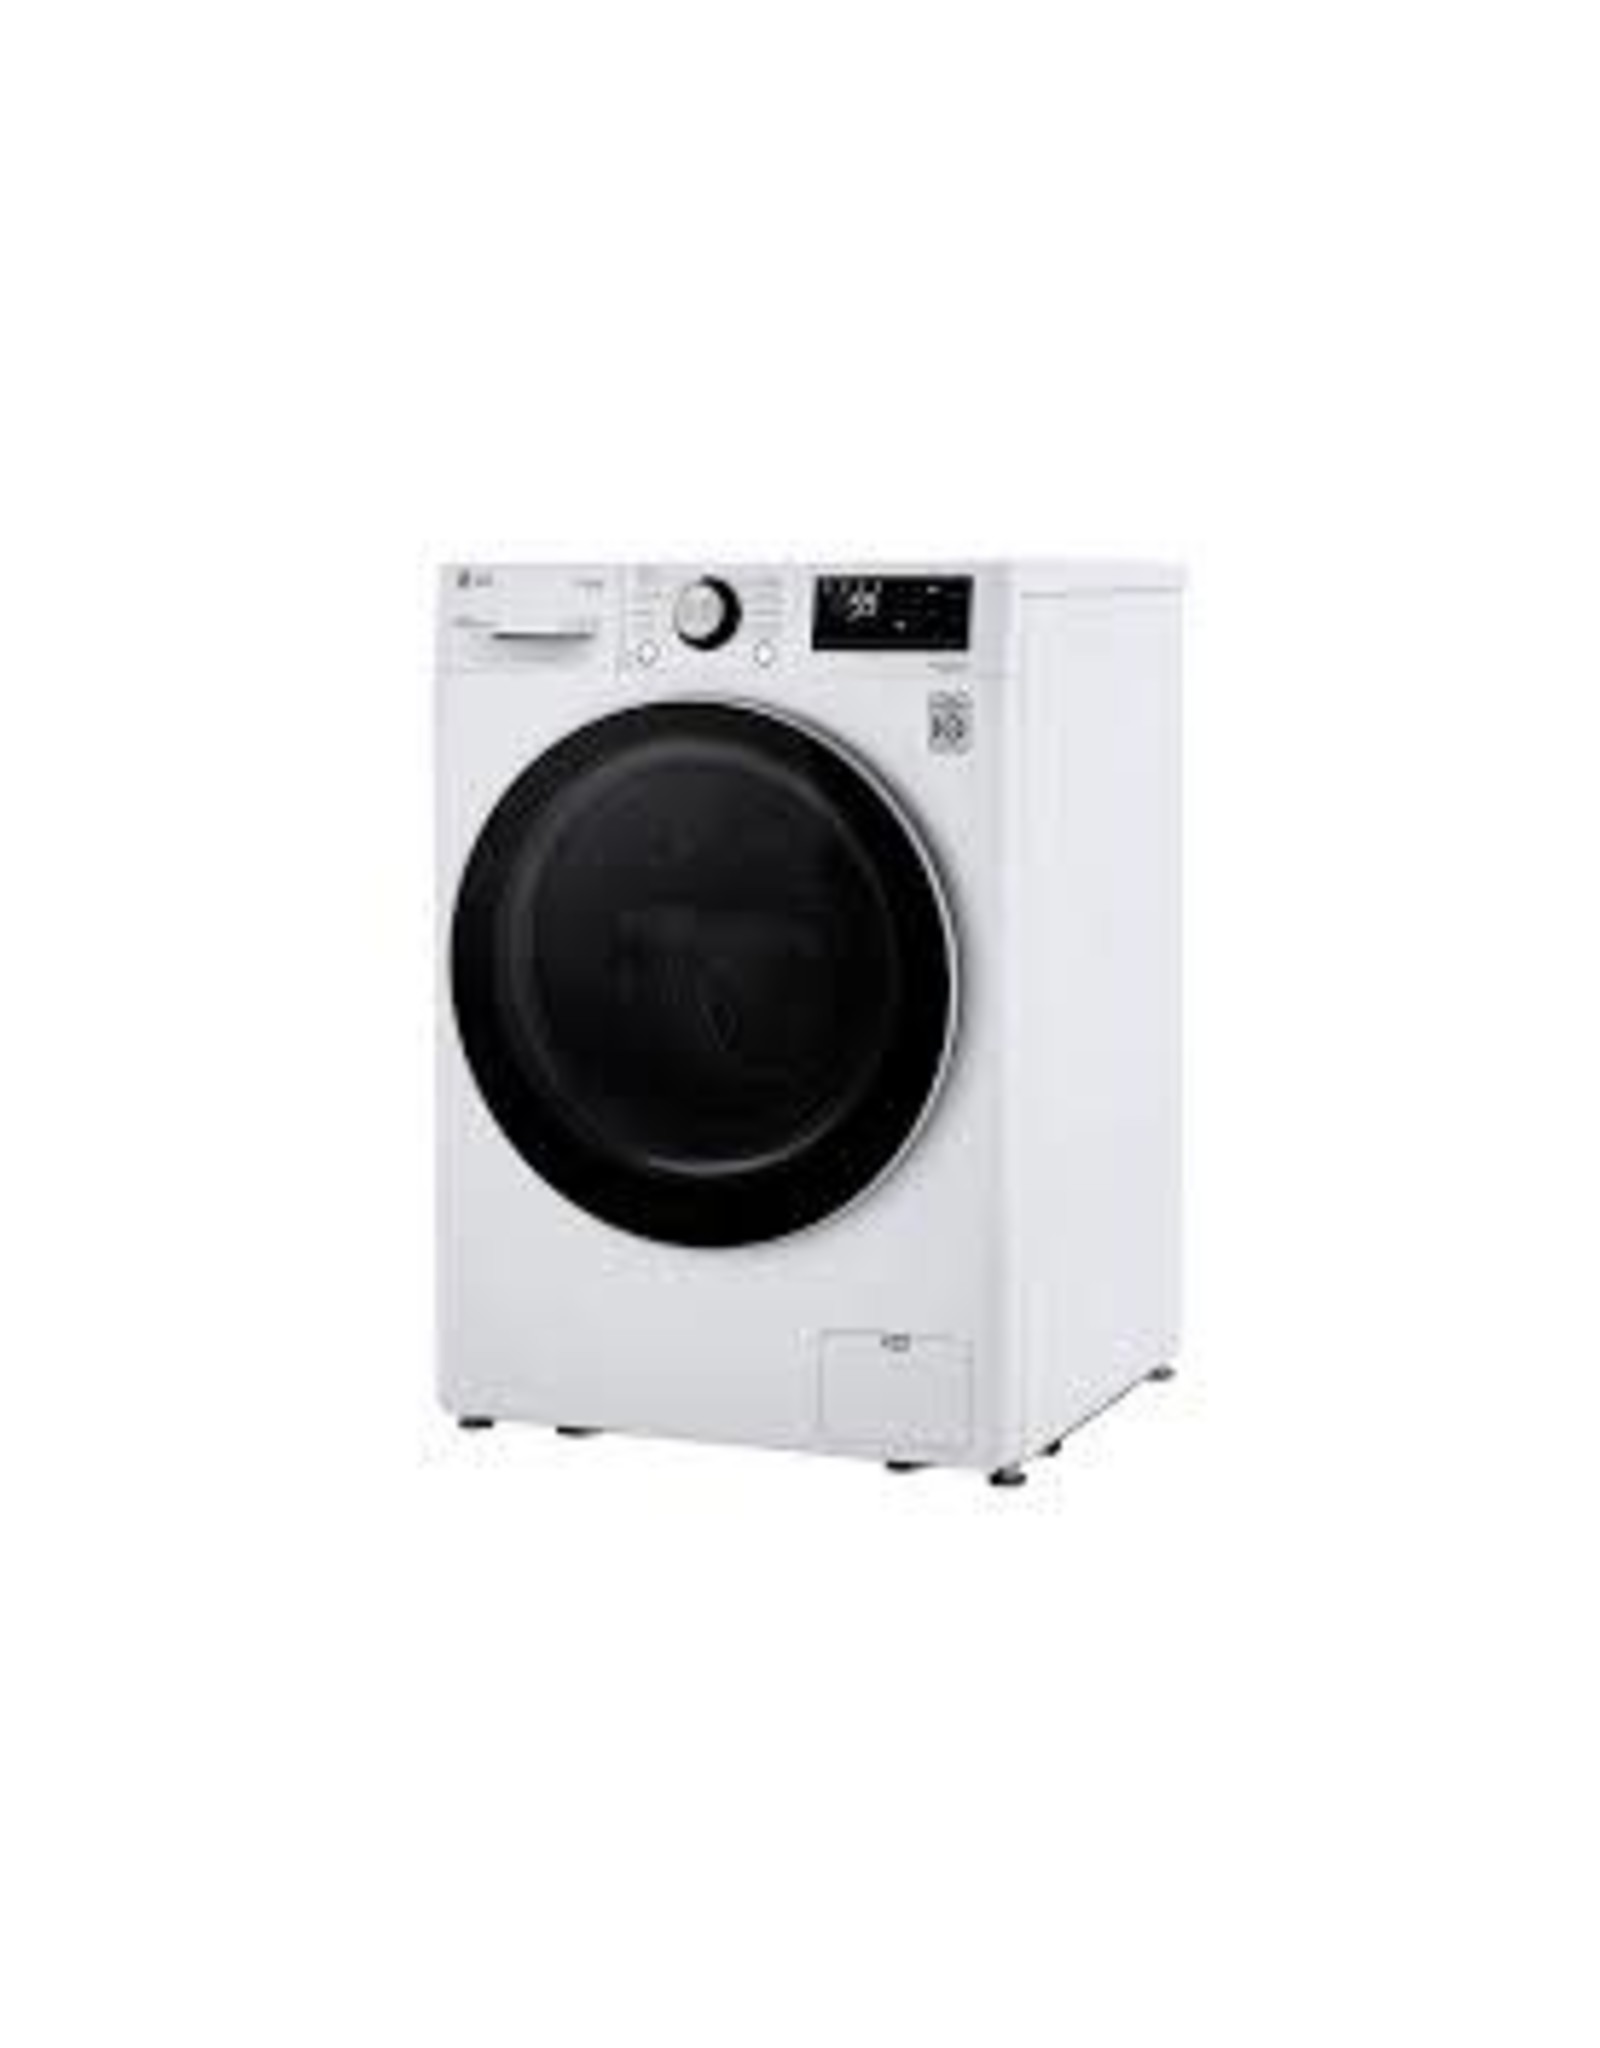 LG Electronics WM1455HWA 2.4 cu.ft. Compact White Front Load Washer with Built-In Intelligence